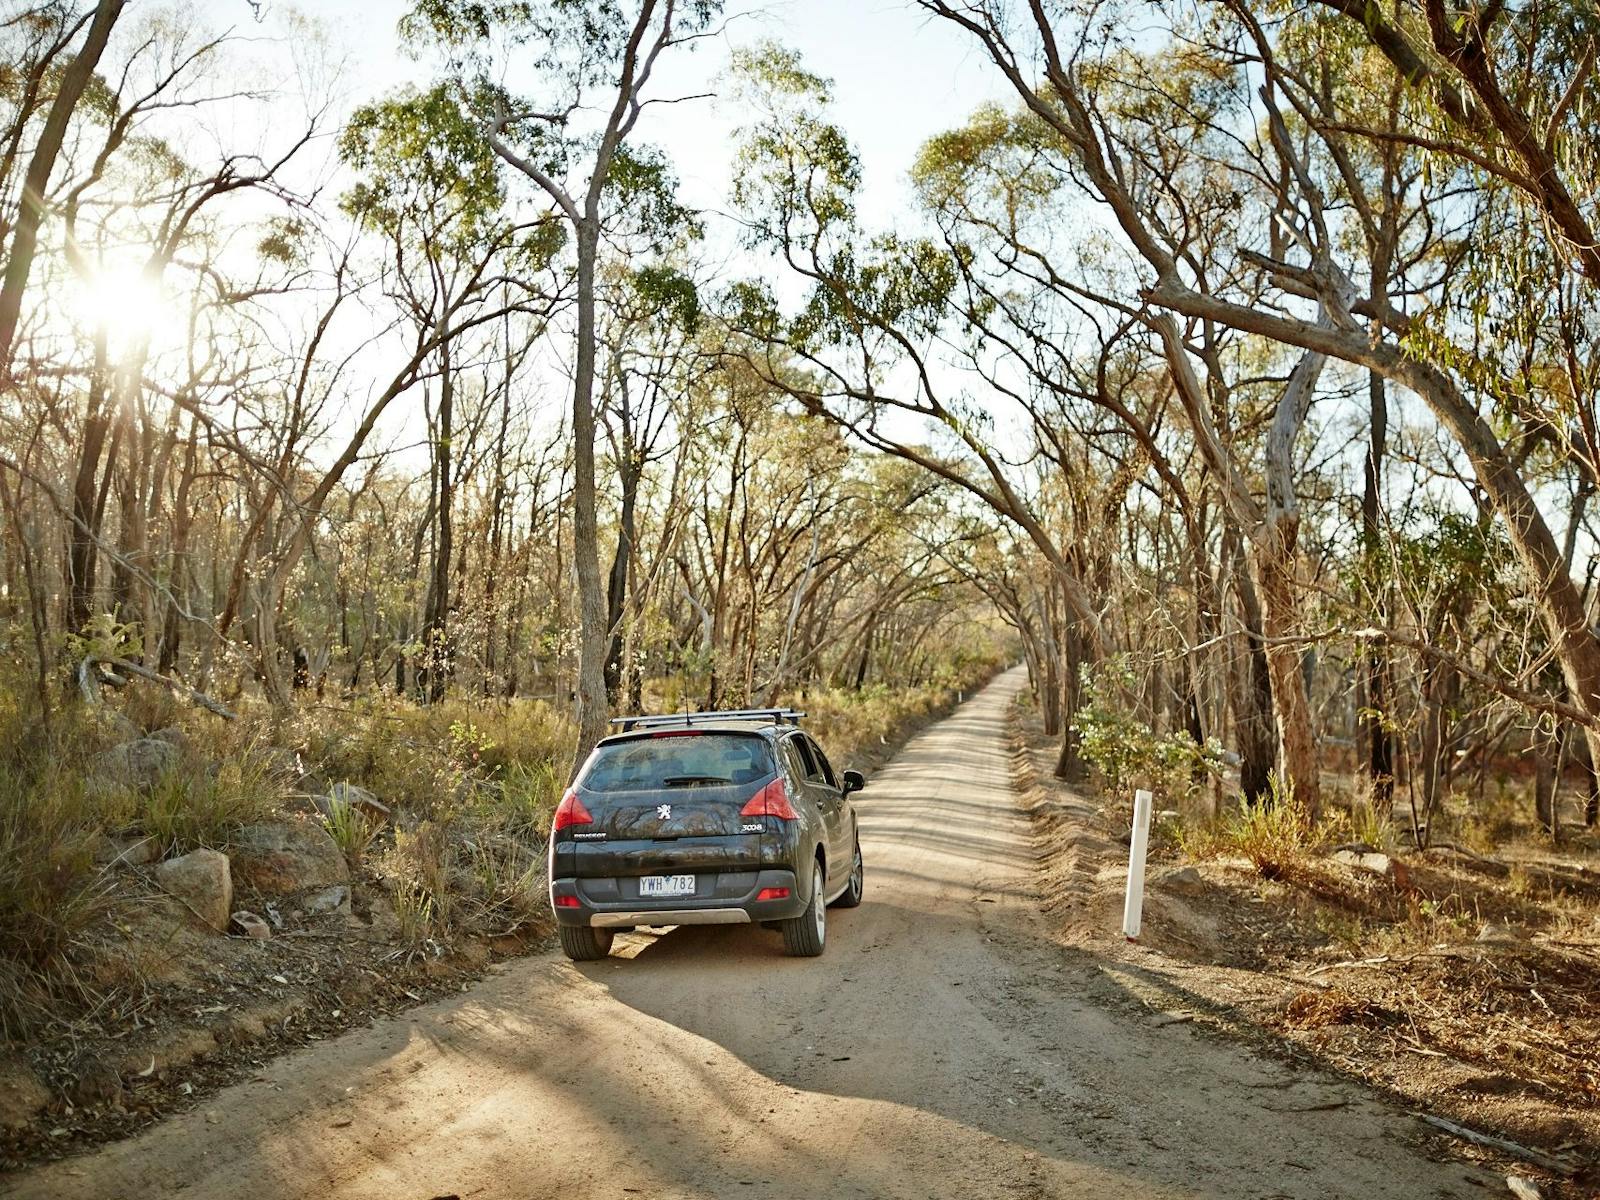 Car on dirt driving track, lined by trees, native grasses, rocks, sunny day.